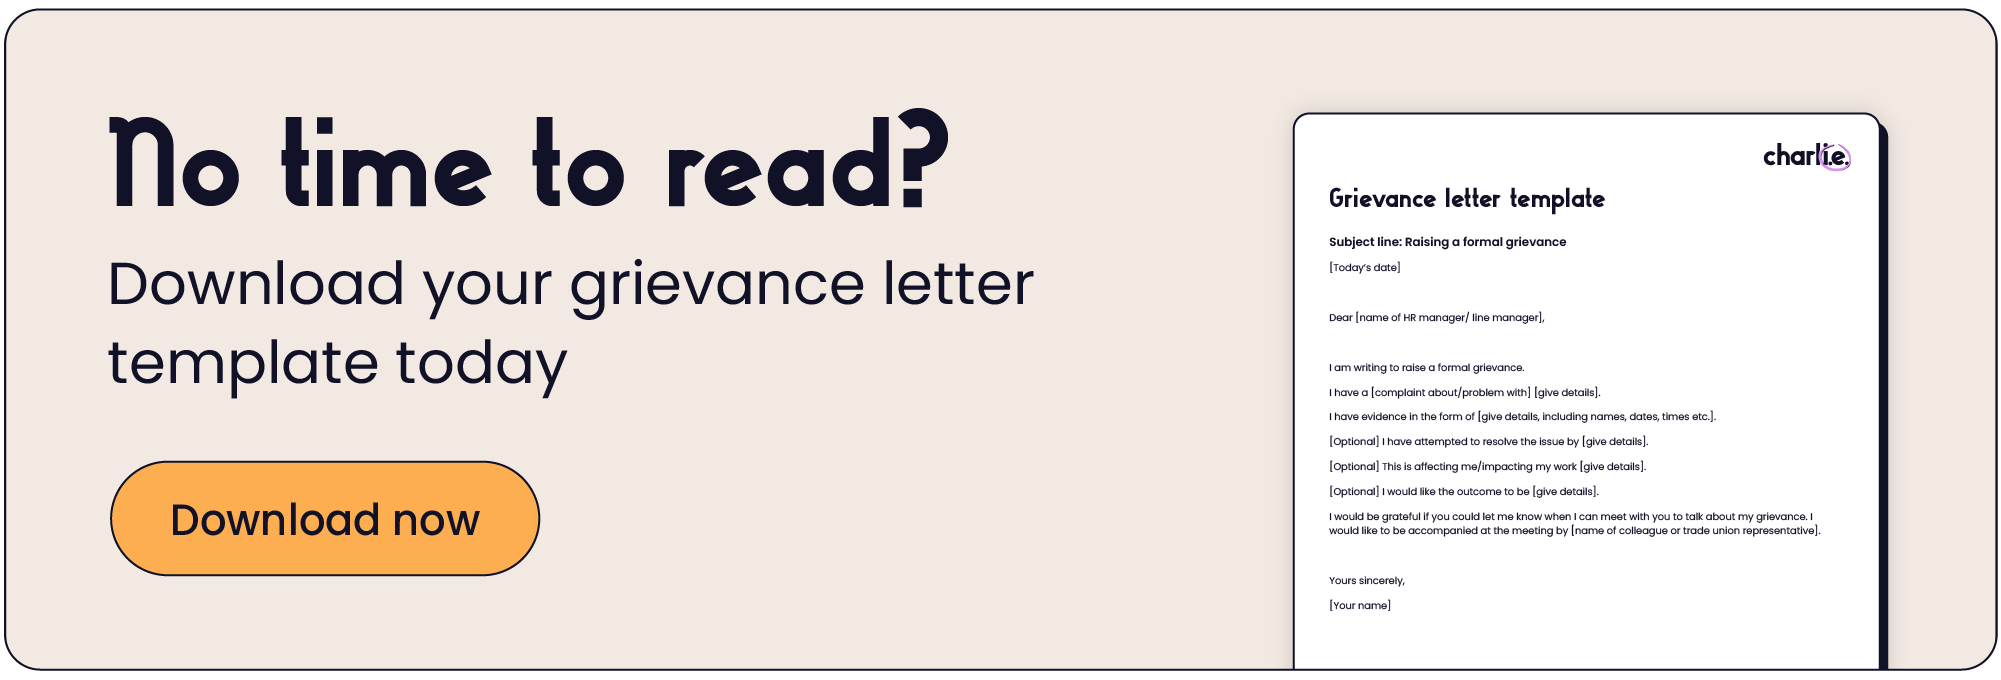 How to write a grievance letter (with free grievance letter template)